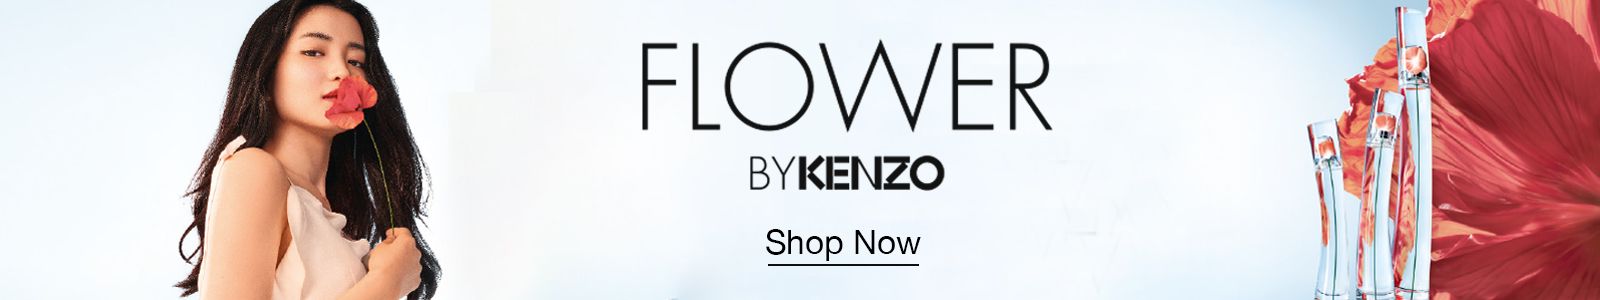 Flower By Kenzo, Shop Now